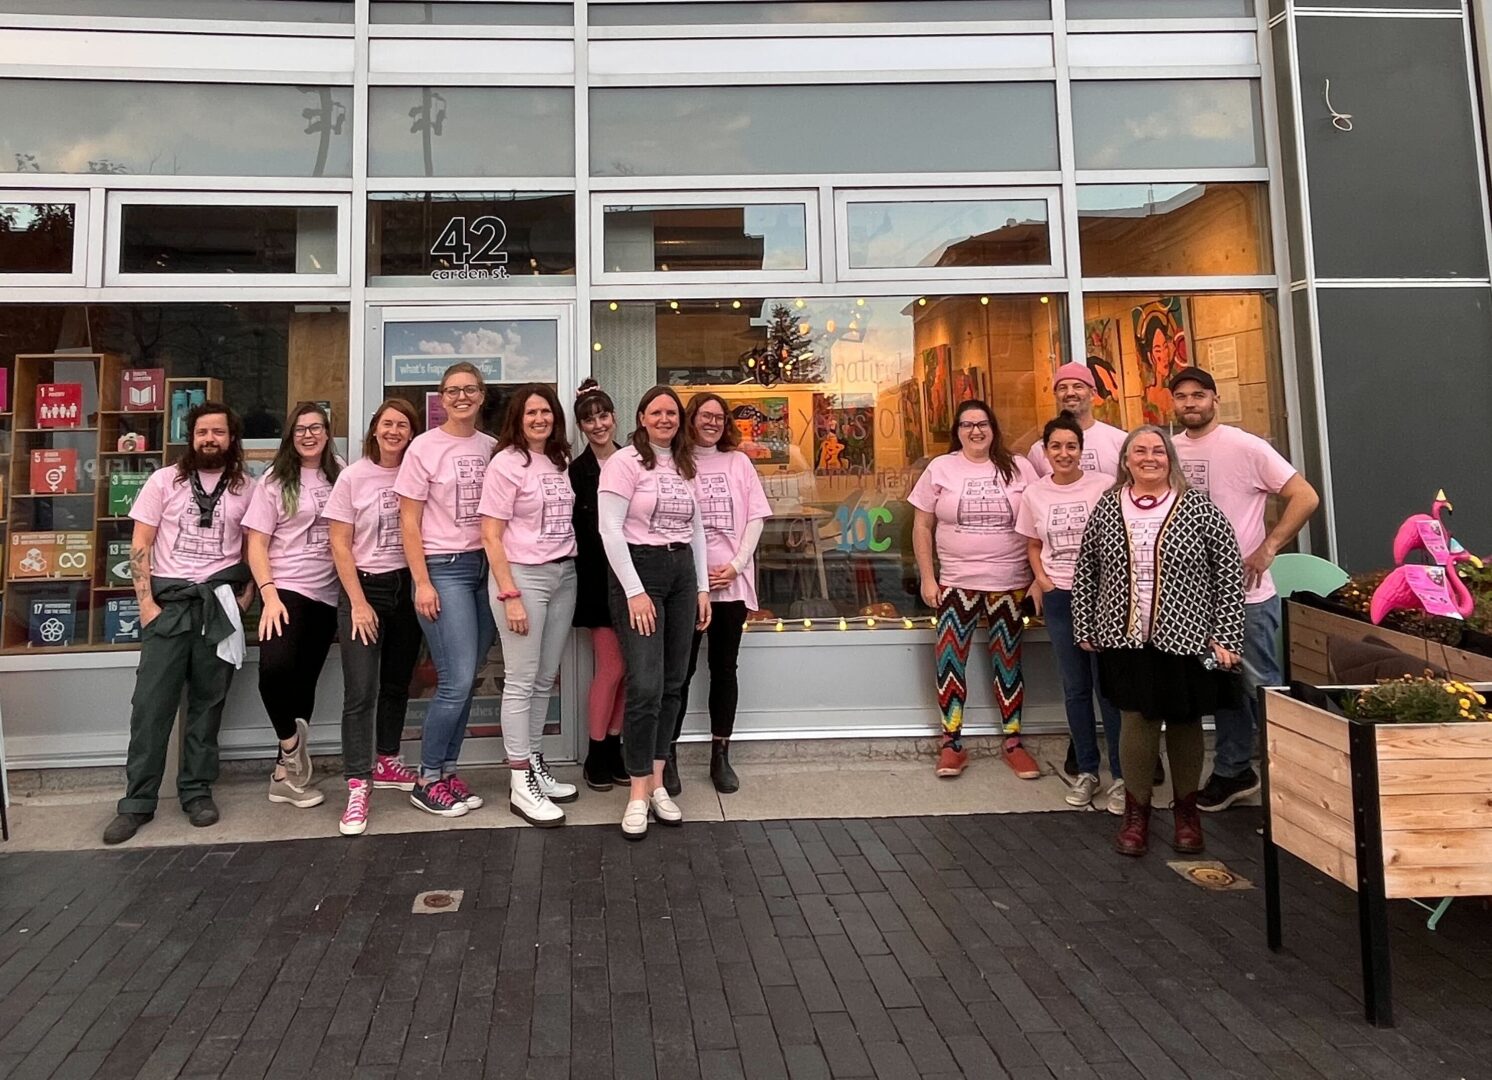 A group of people stand outside in front of a building wearing matching pink t-shirts.